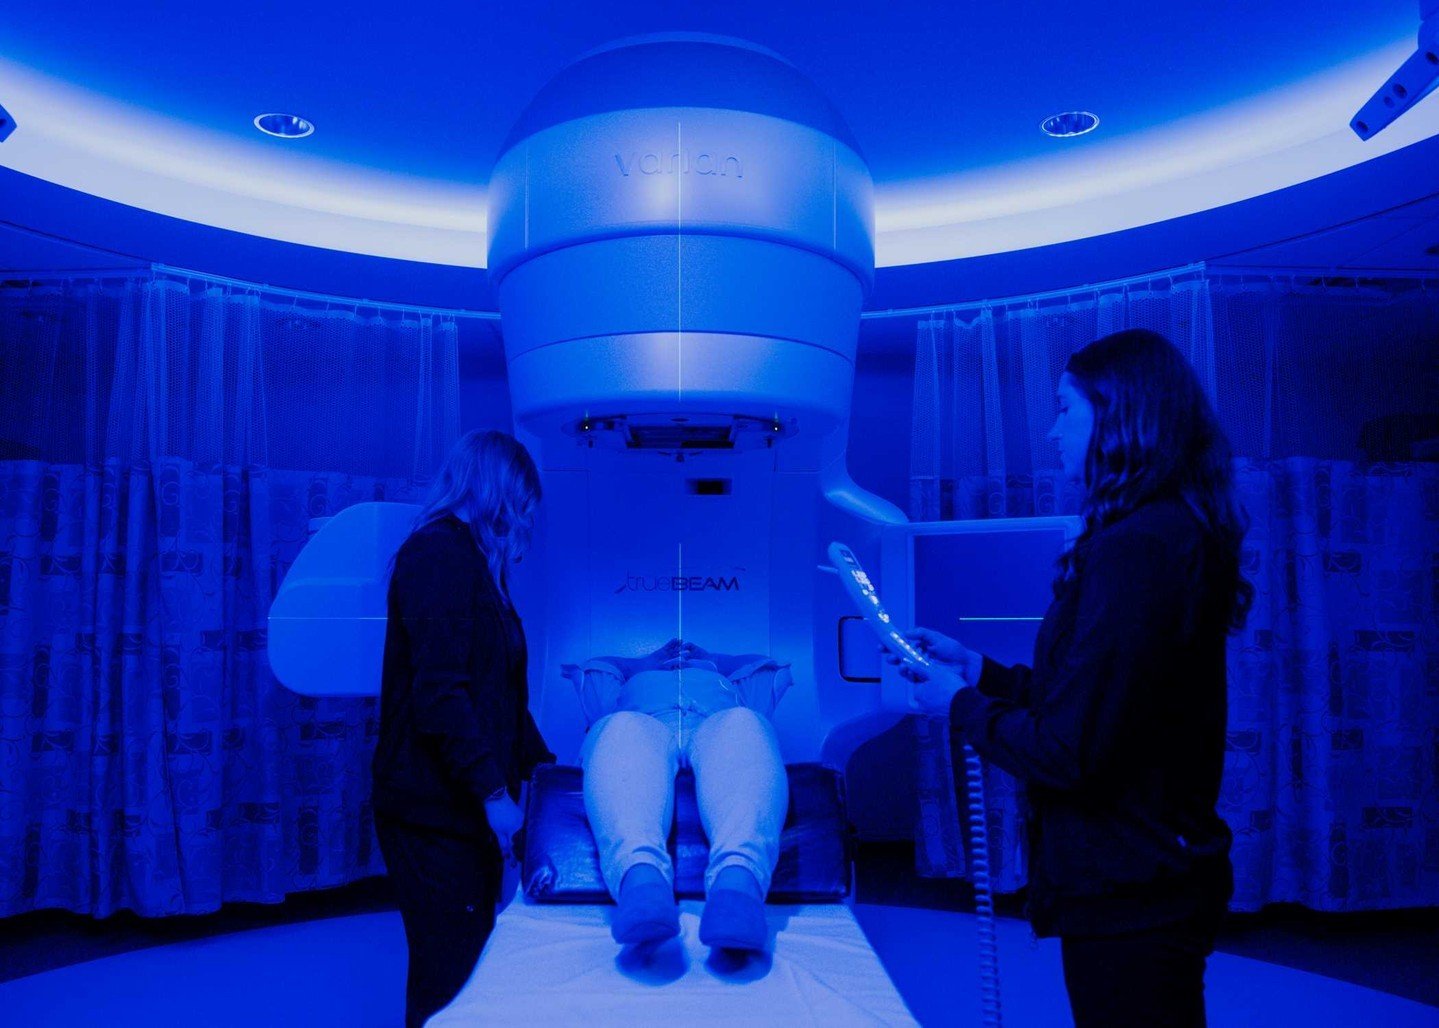 In the simplest of terms, the goal of radiation therapy is to destroy as many cancer cells as possible, while limiting harm to healthy cells and tissue. 
.
Learn more about radiation therapy, a targeted cancer treatment: #linkinbio